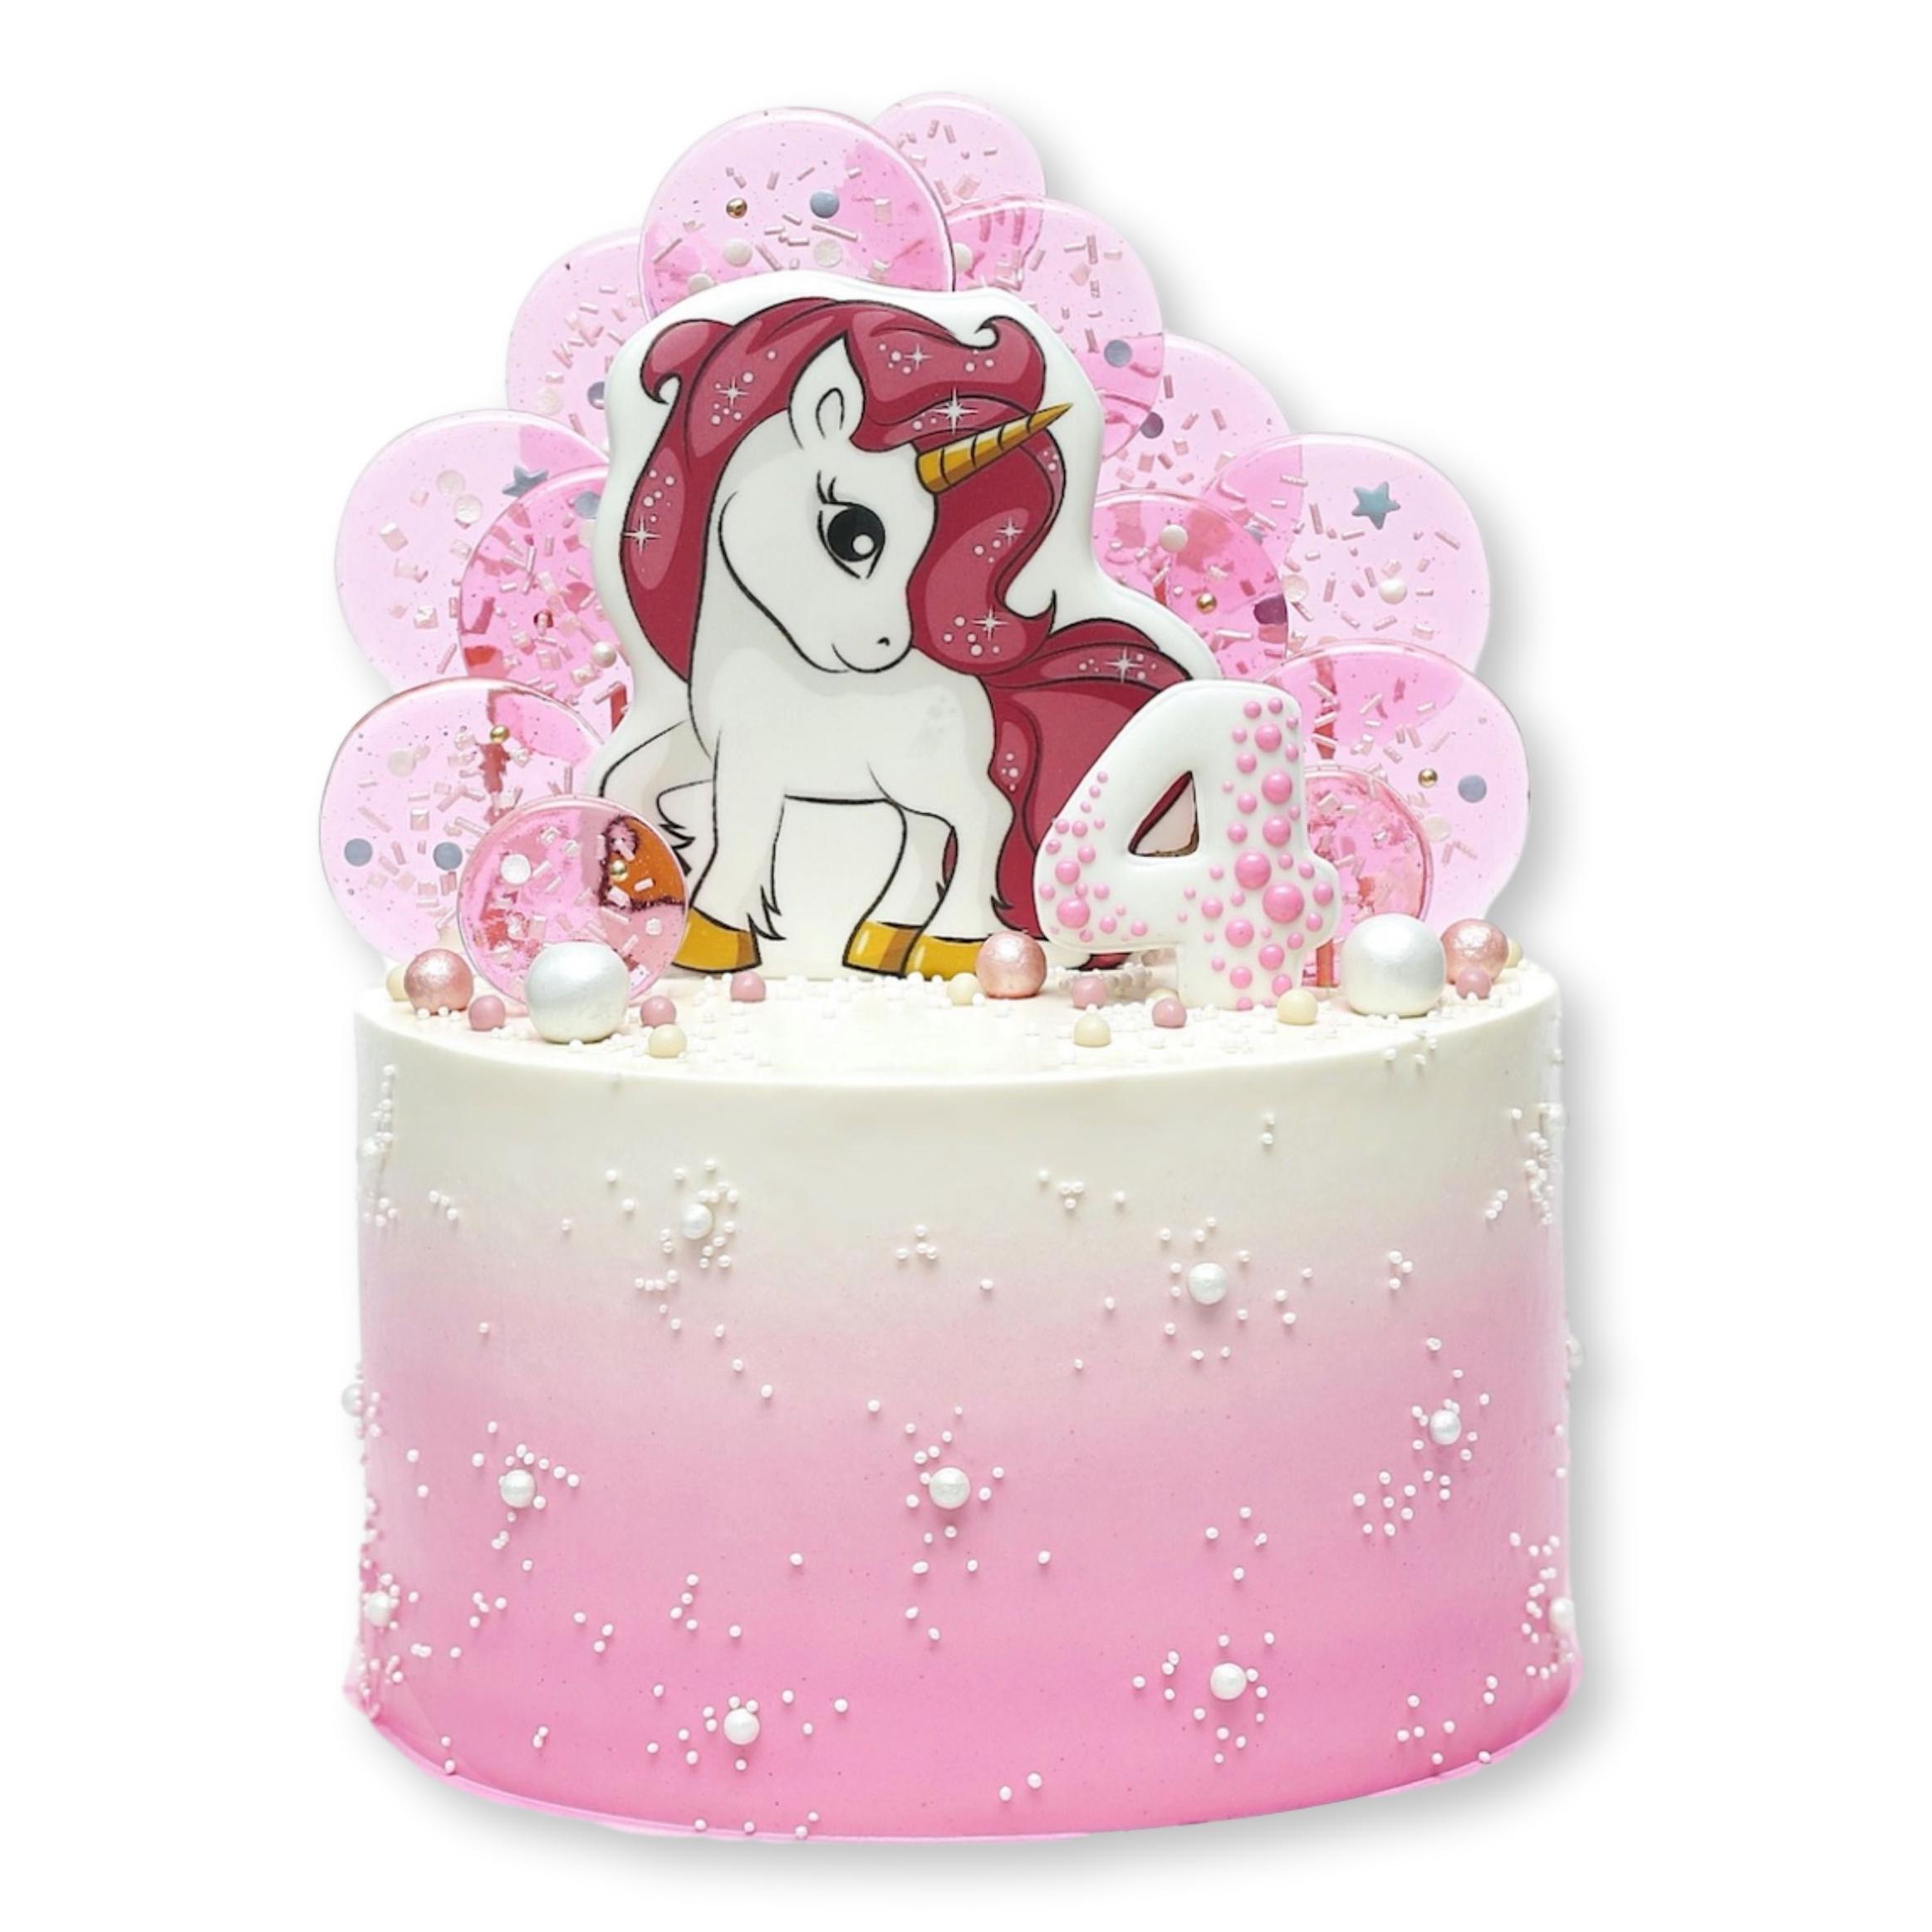 Izzy's Wonderful Unicorn Cake and more kid's recipes by Chefclub |  chefclub.tv